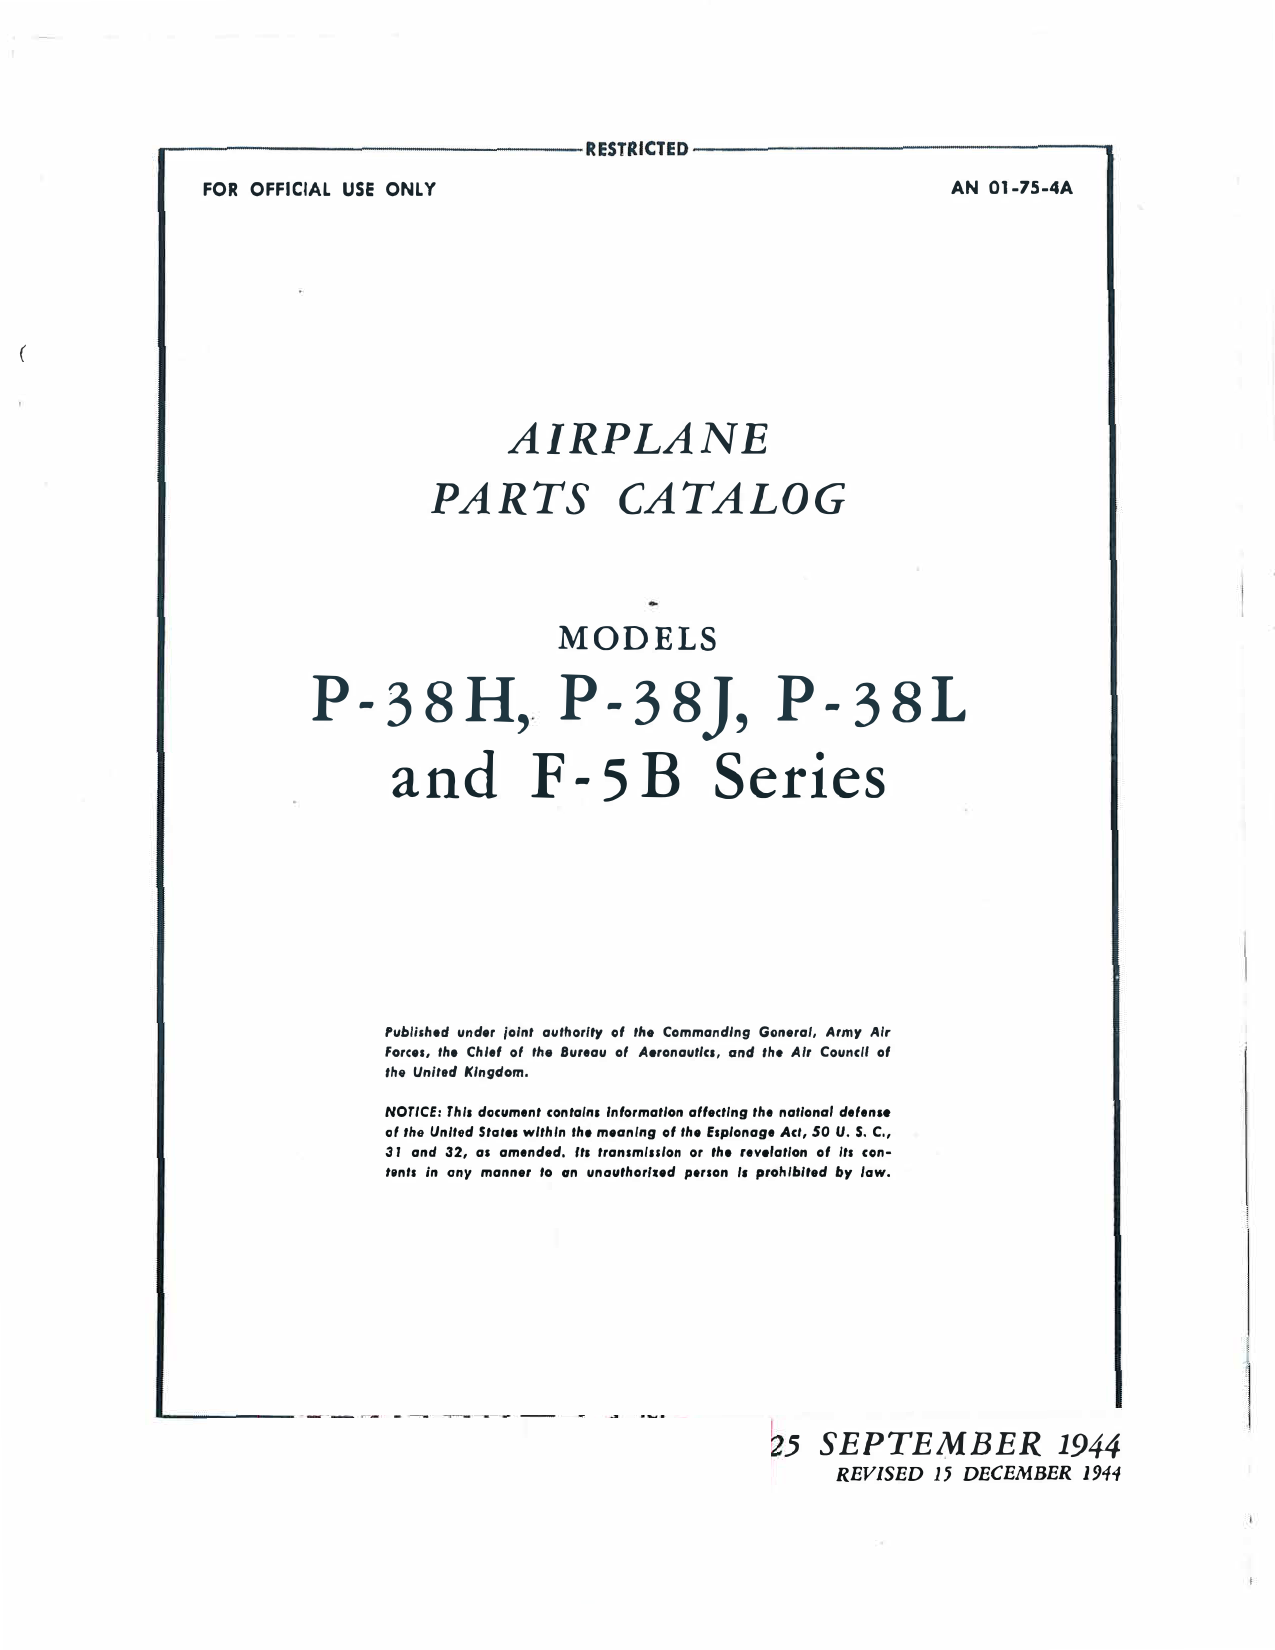 Sample page 1 from AirCorps Library document: Airplane Parts Catalog - P-38H, P-38J, P-38L, F-5B - Dec 1944